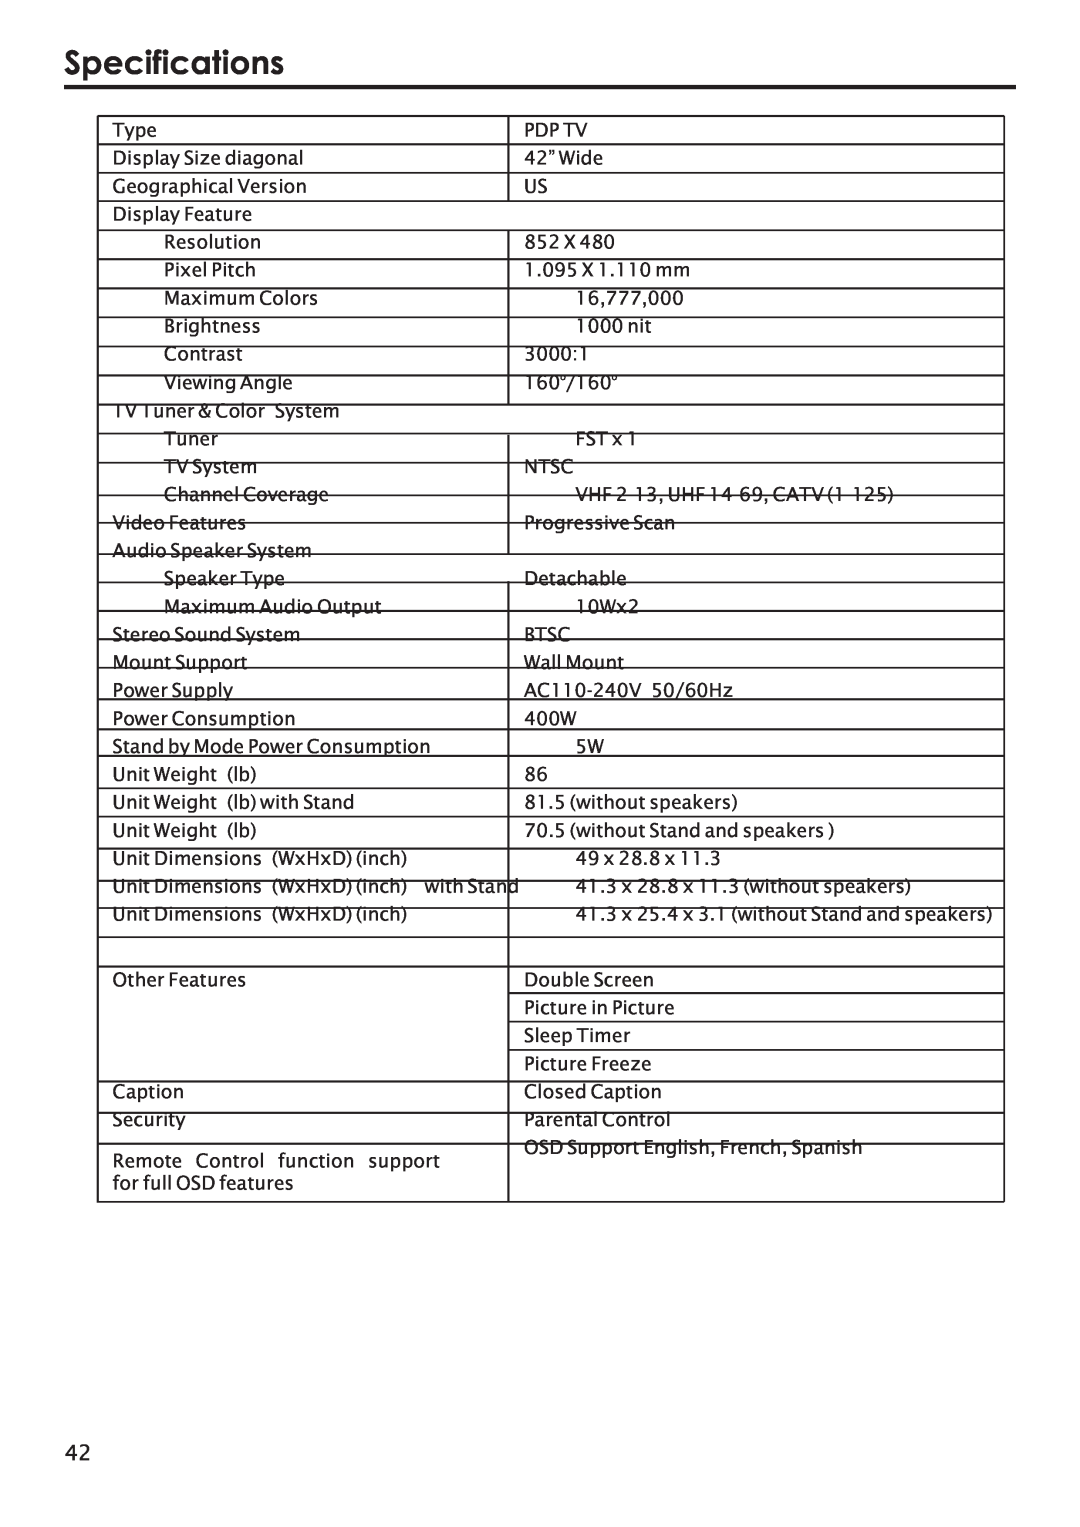 Primate Systems PDP TV manual Specifications 